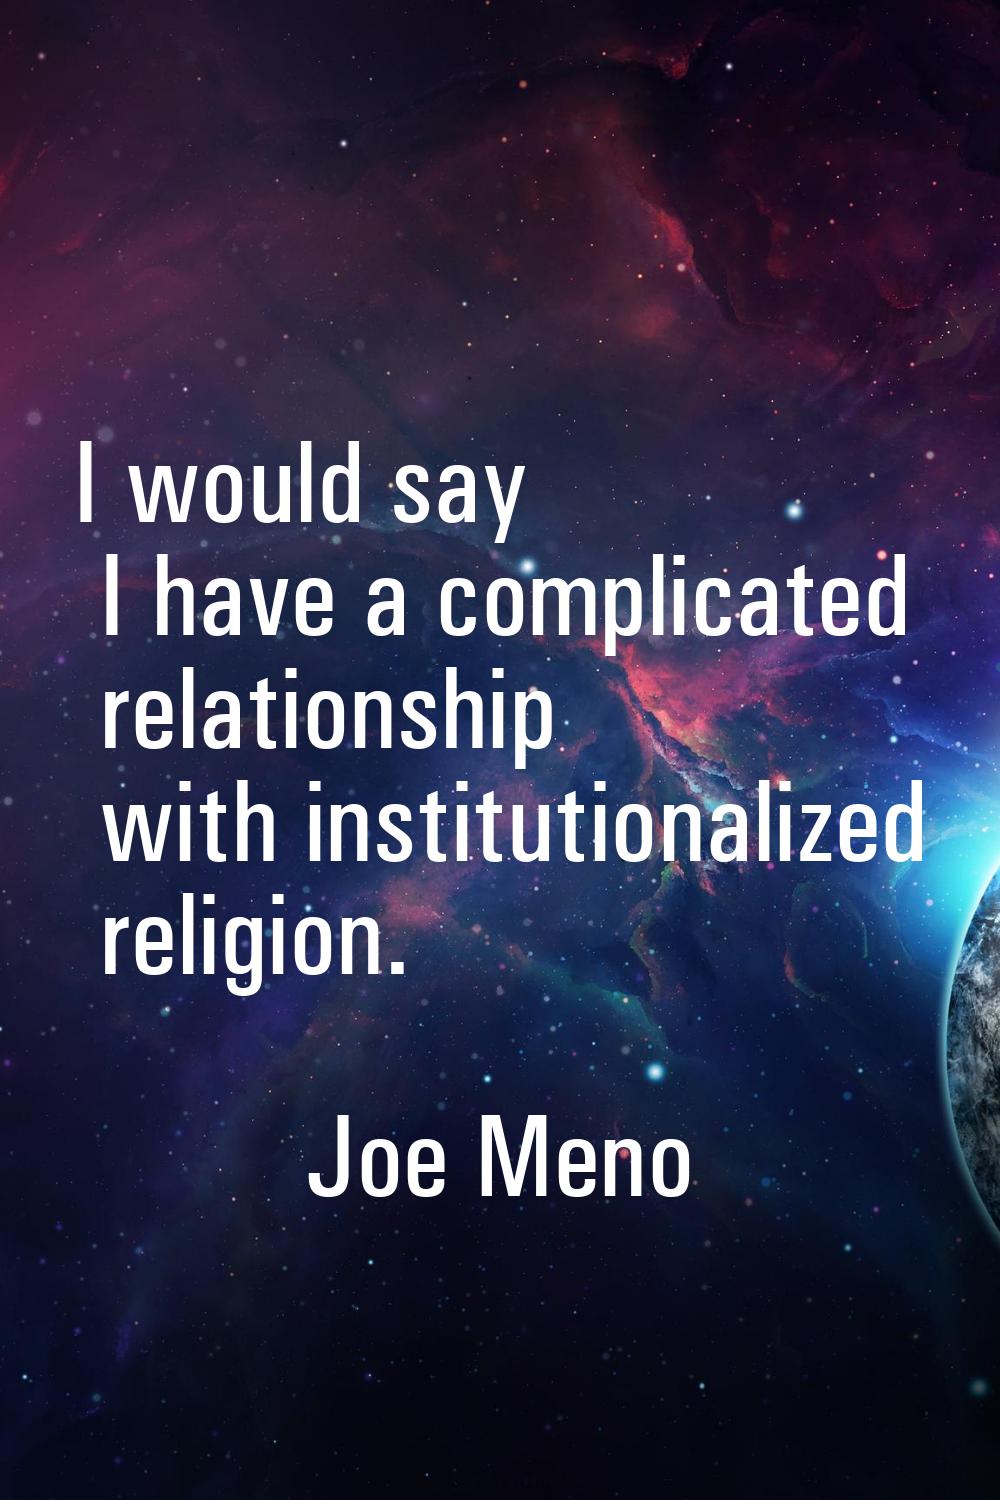 I would say I have a complicated relationship with institutionalized religion.